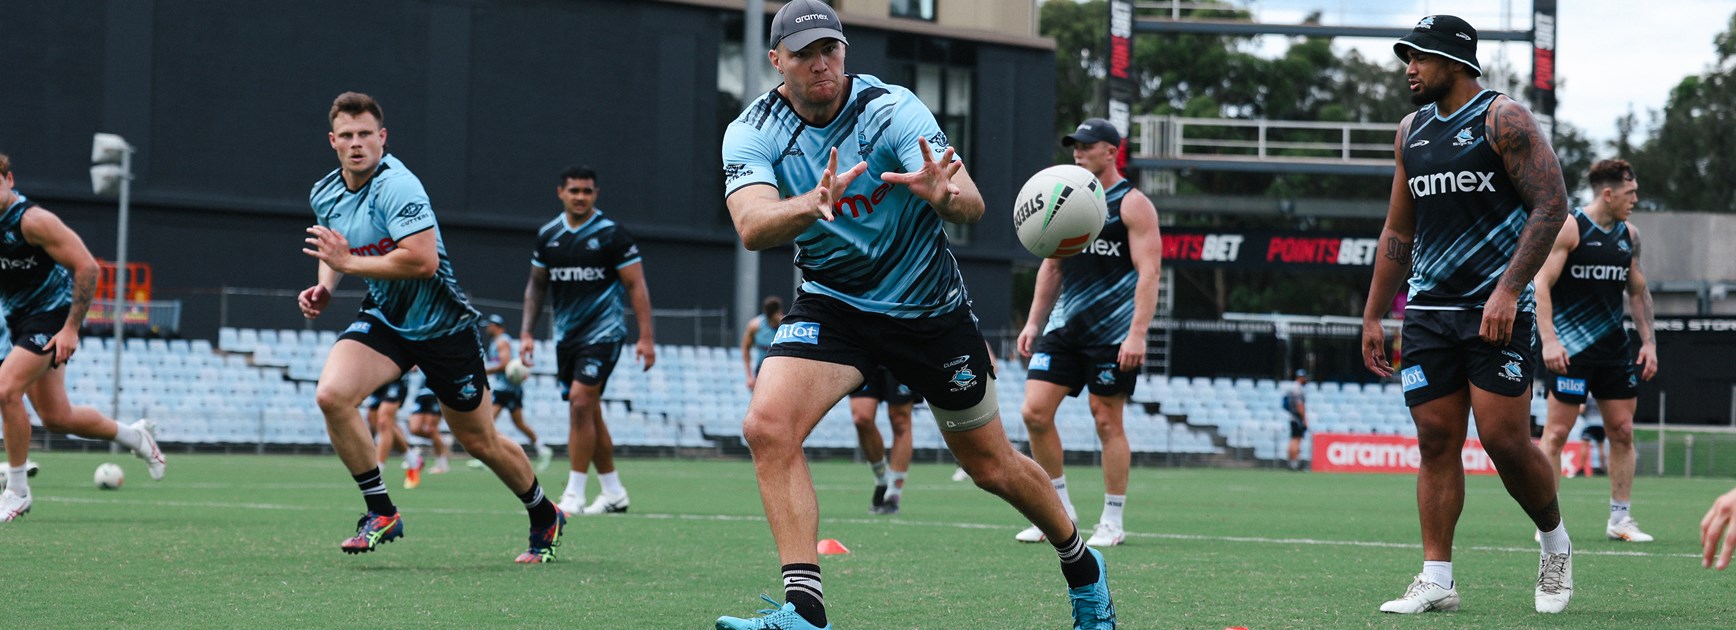 Young talent time: Why the Sharks are in deep on development over signings spree